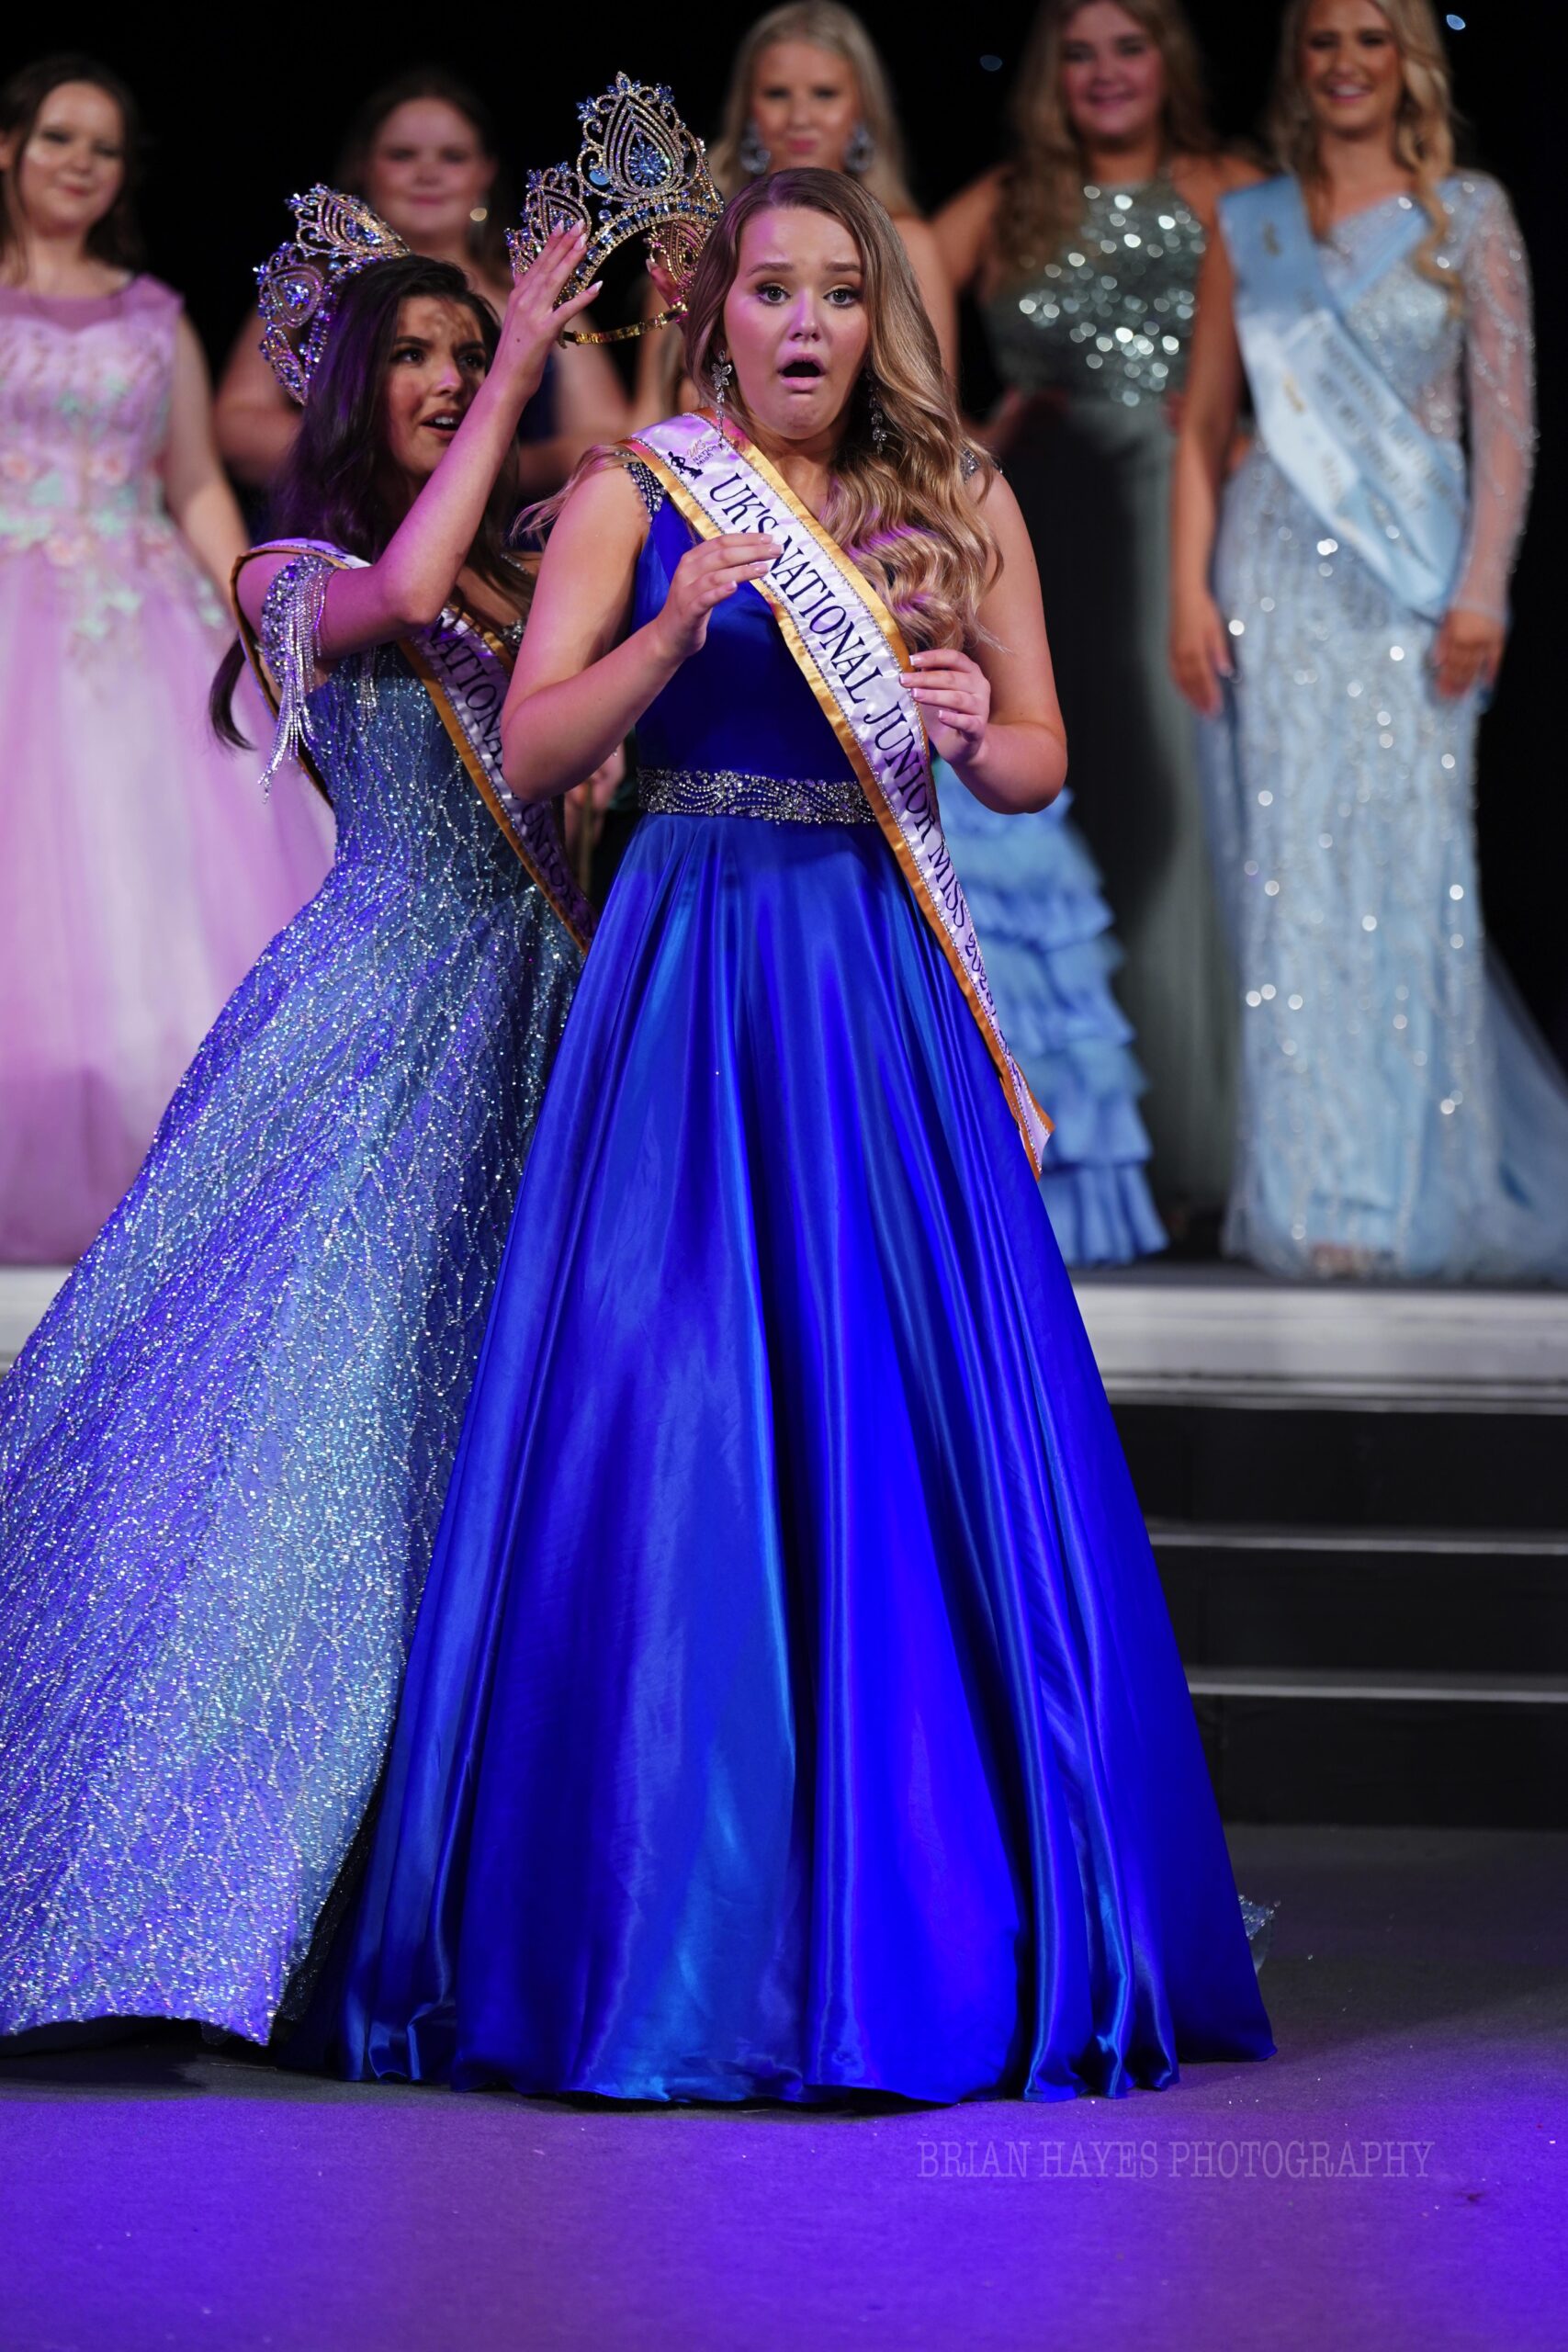 UK's National Miss 2021 - Finals, Crowning & Results!